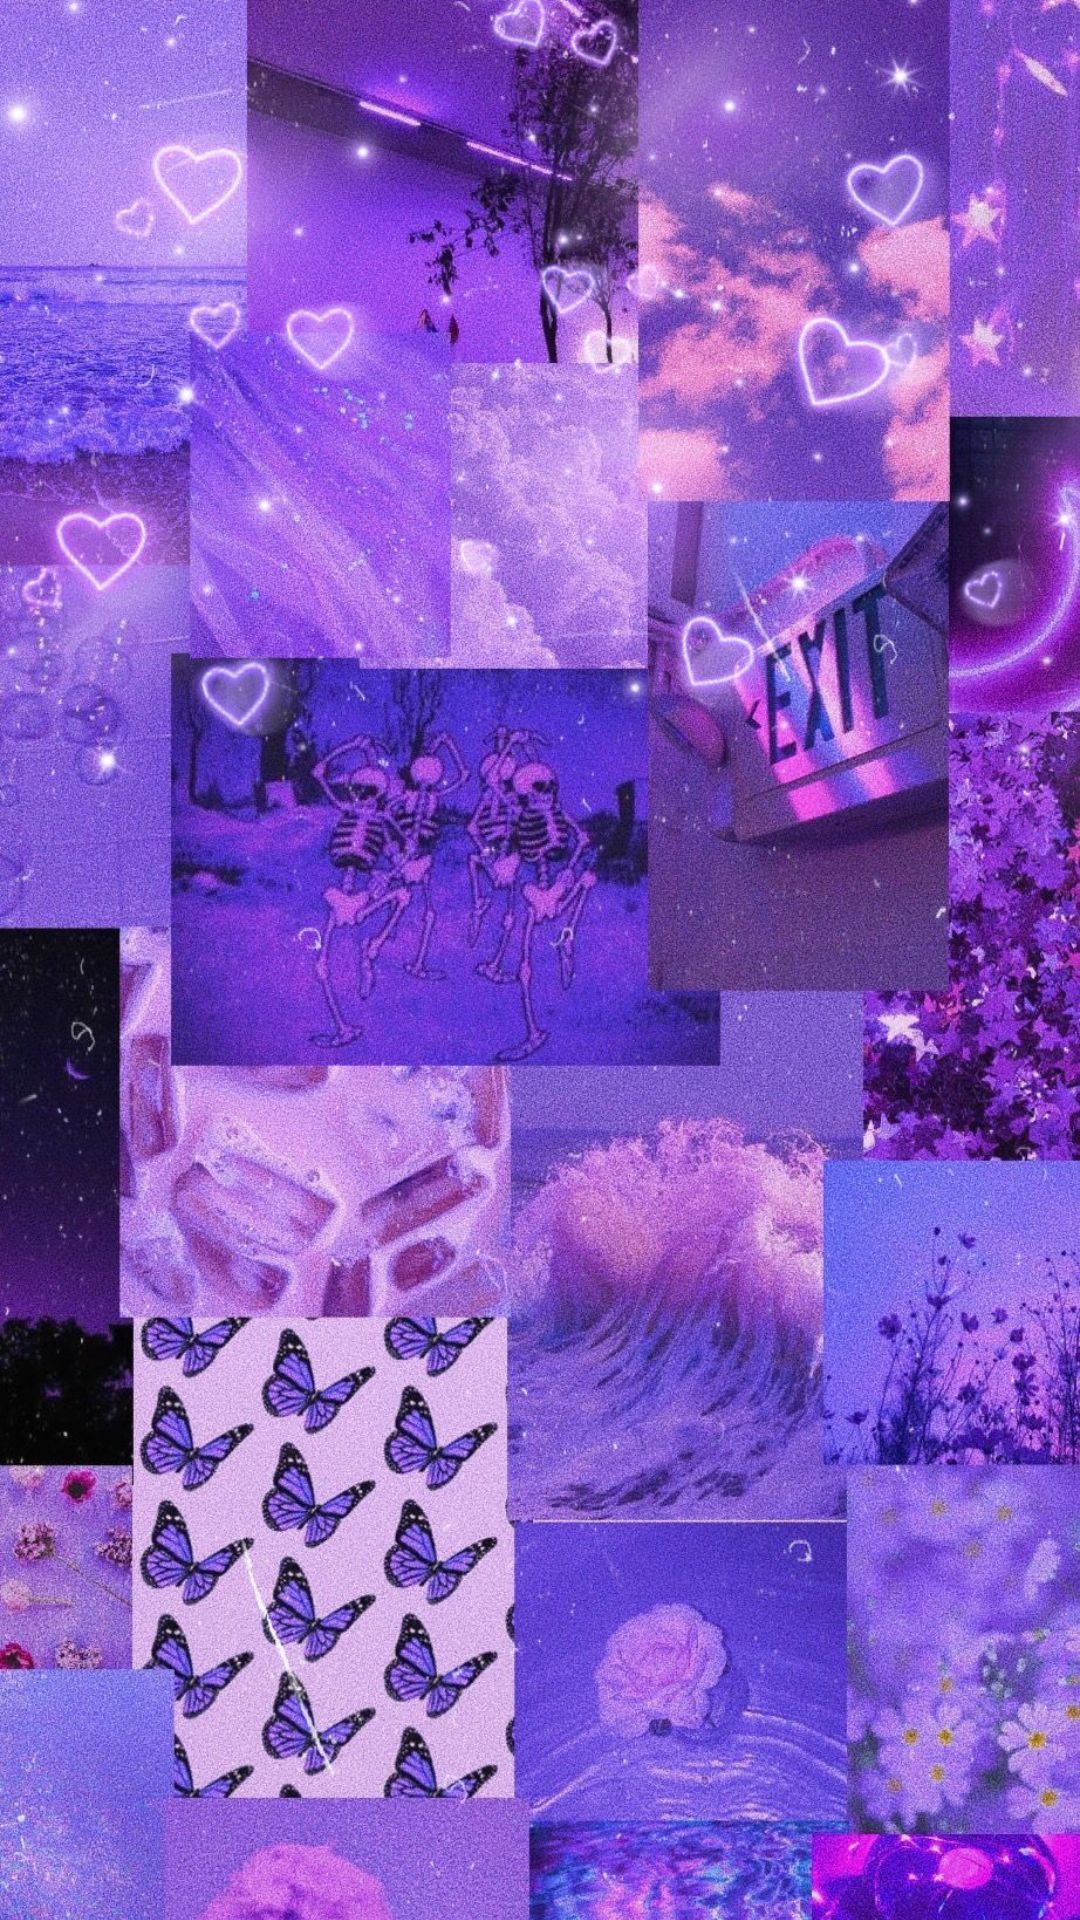 A collage of purple pictures with hearts and butterflies - Purple, glitter, lavender, light purple, cute purple, dark purple, HD, magenta, violet